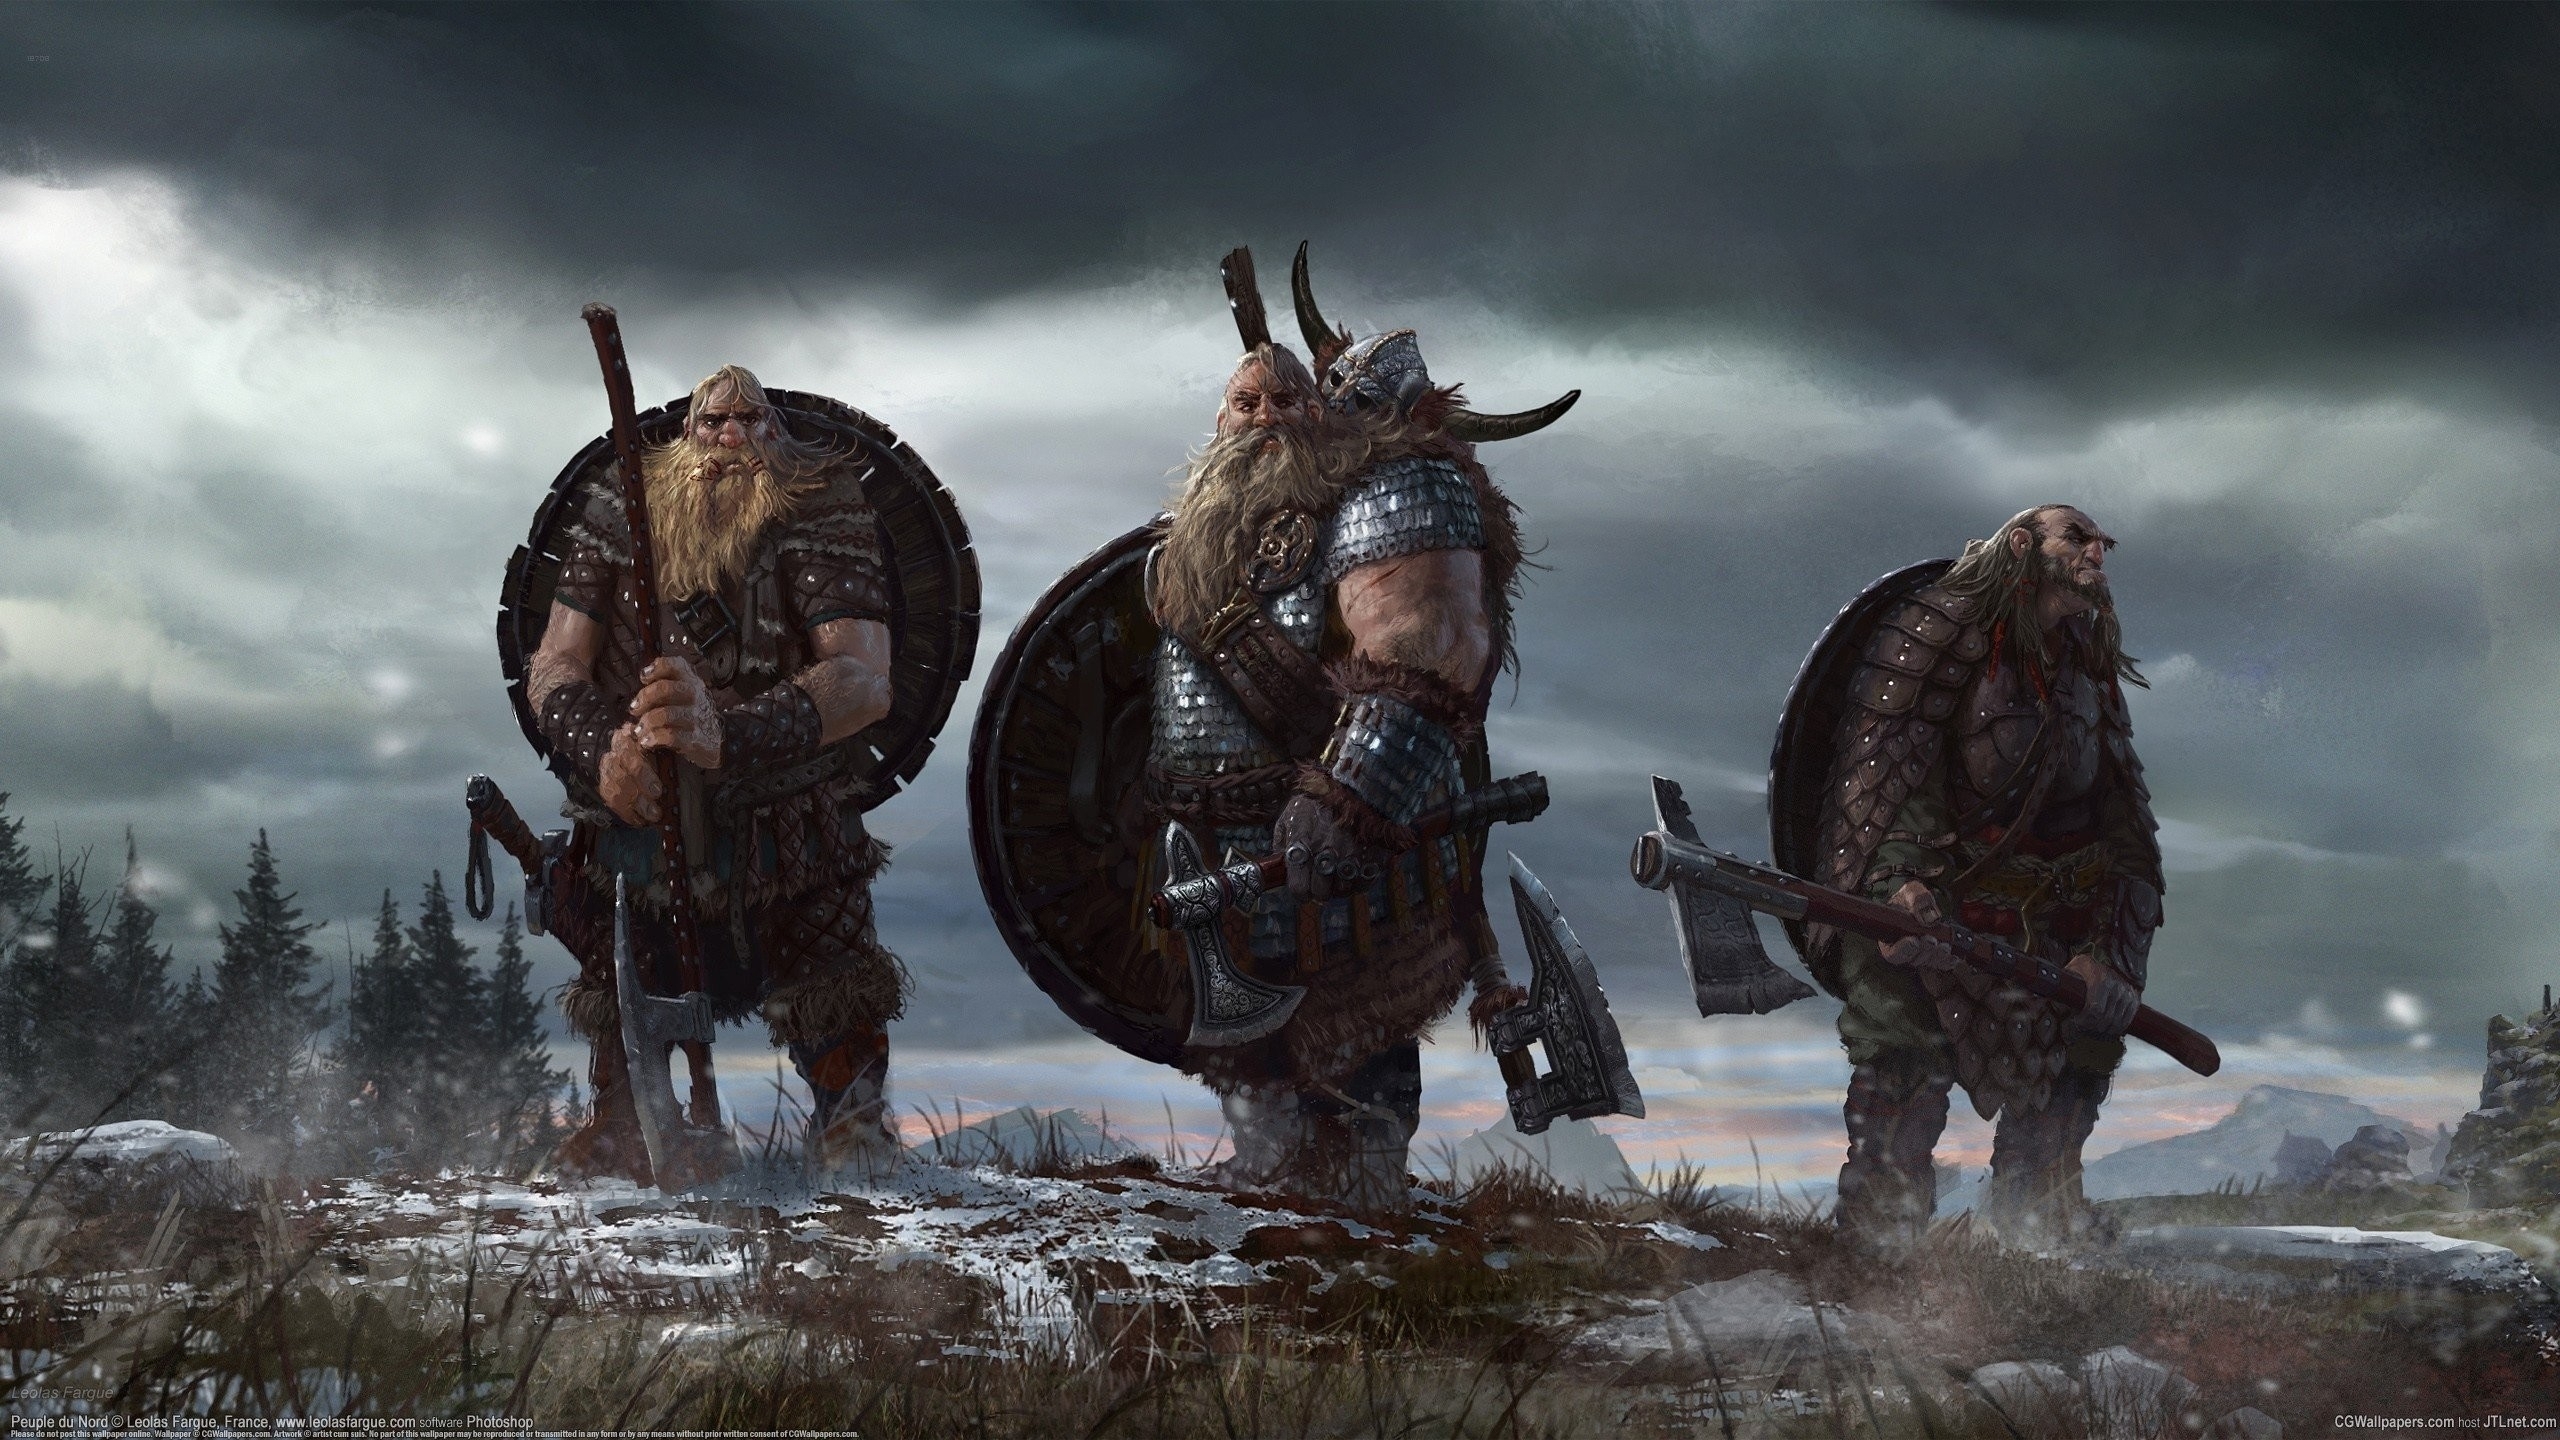 10 Top Viking Warrior Wallpaper Hd FULL HD 1920×1080 For PC Background